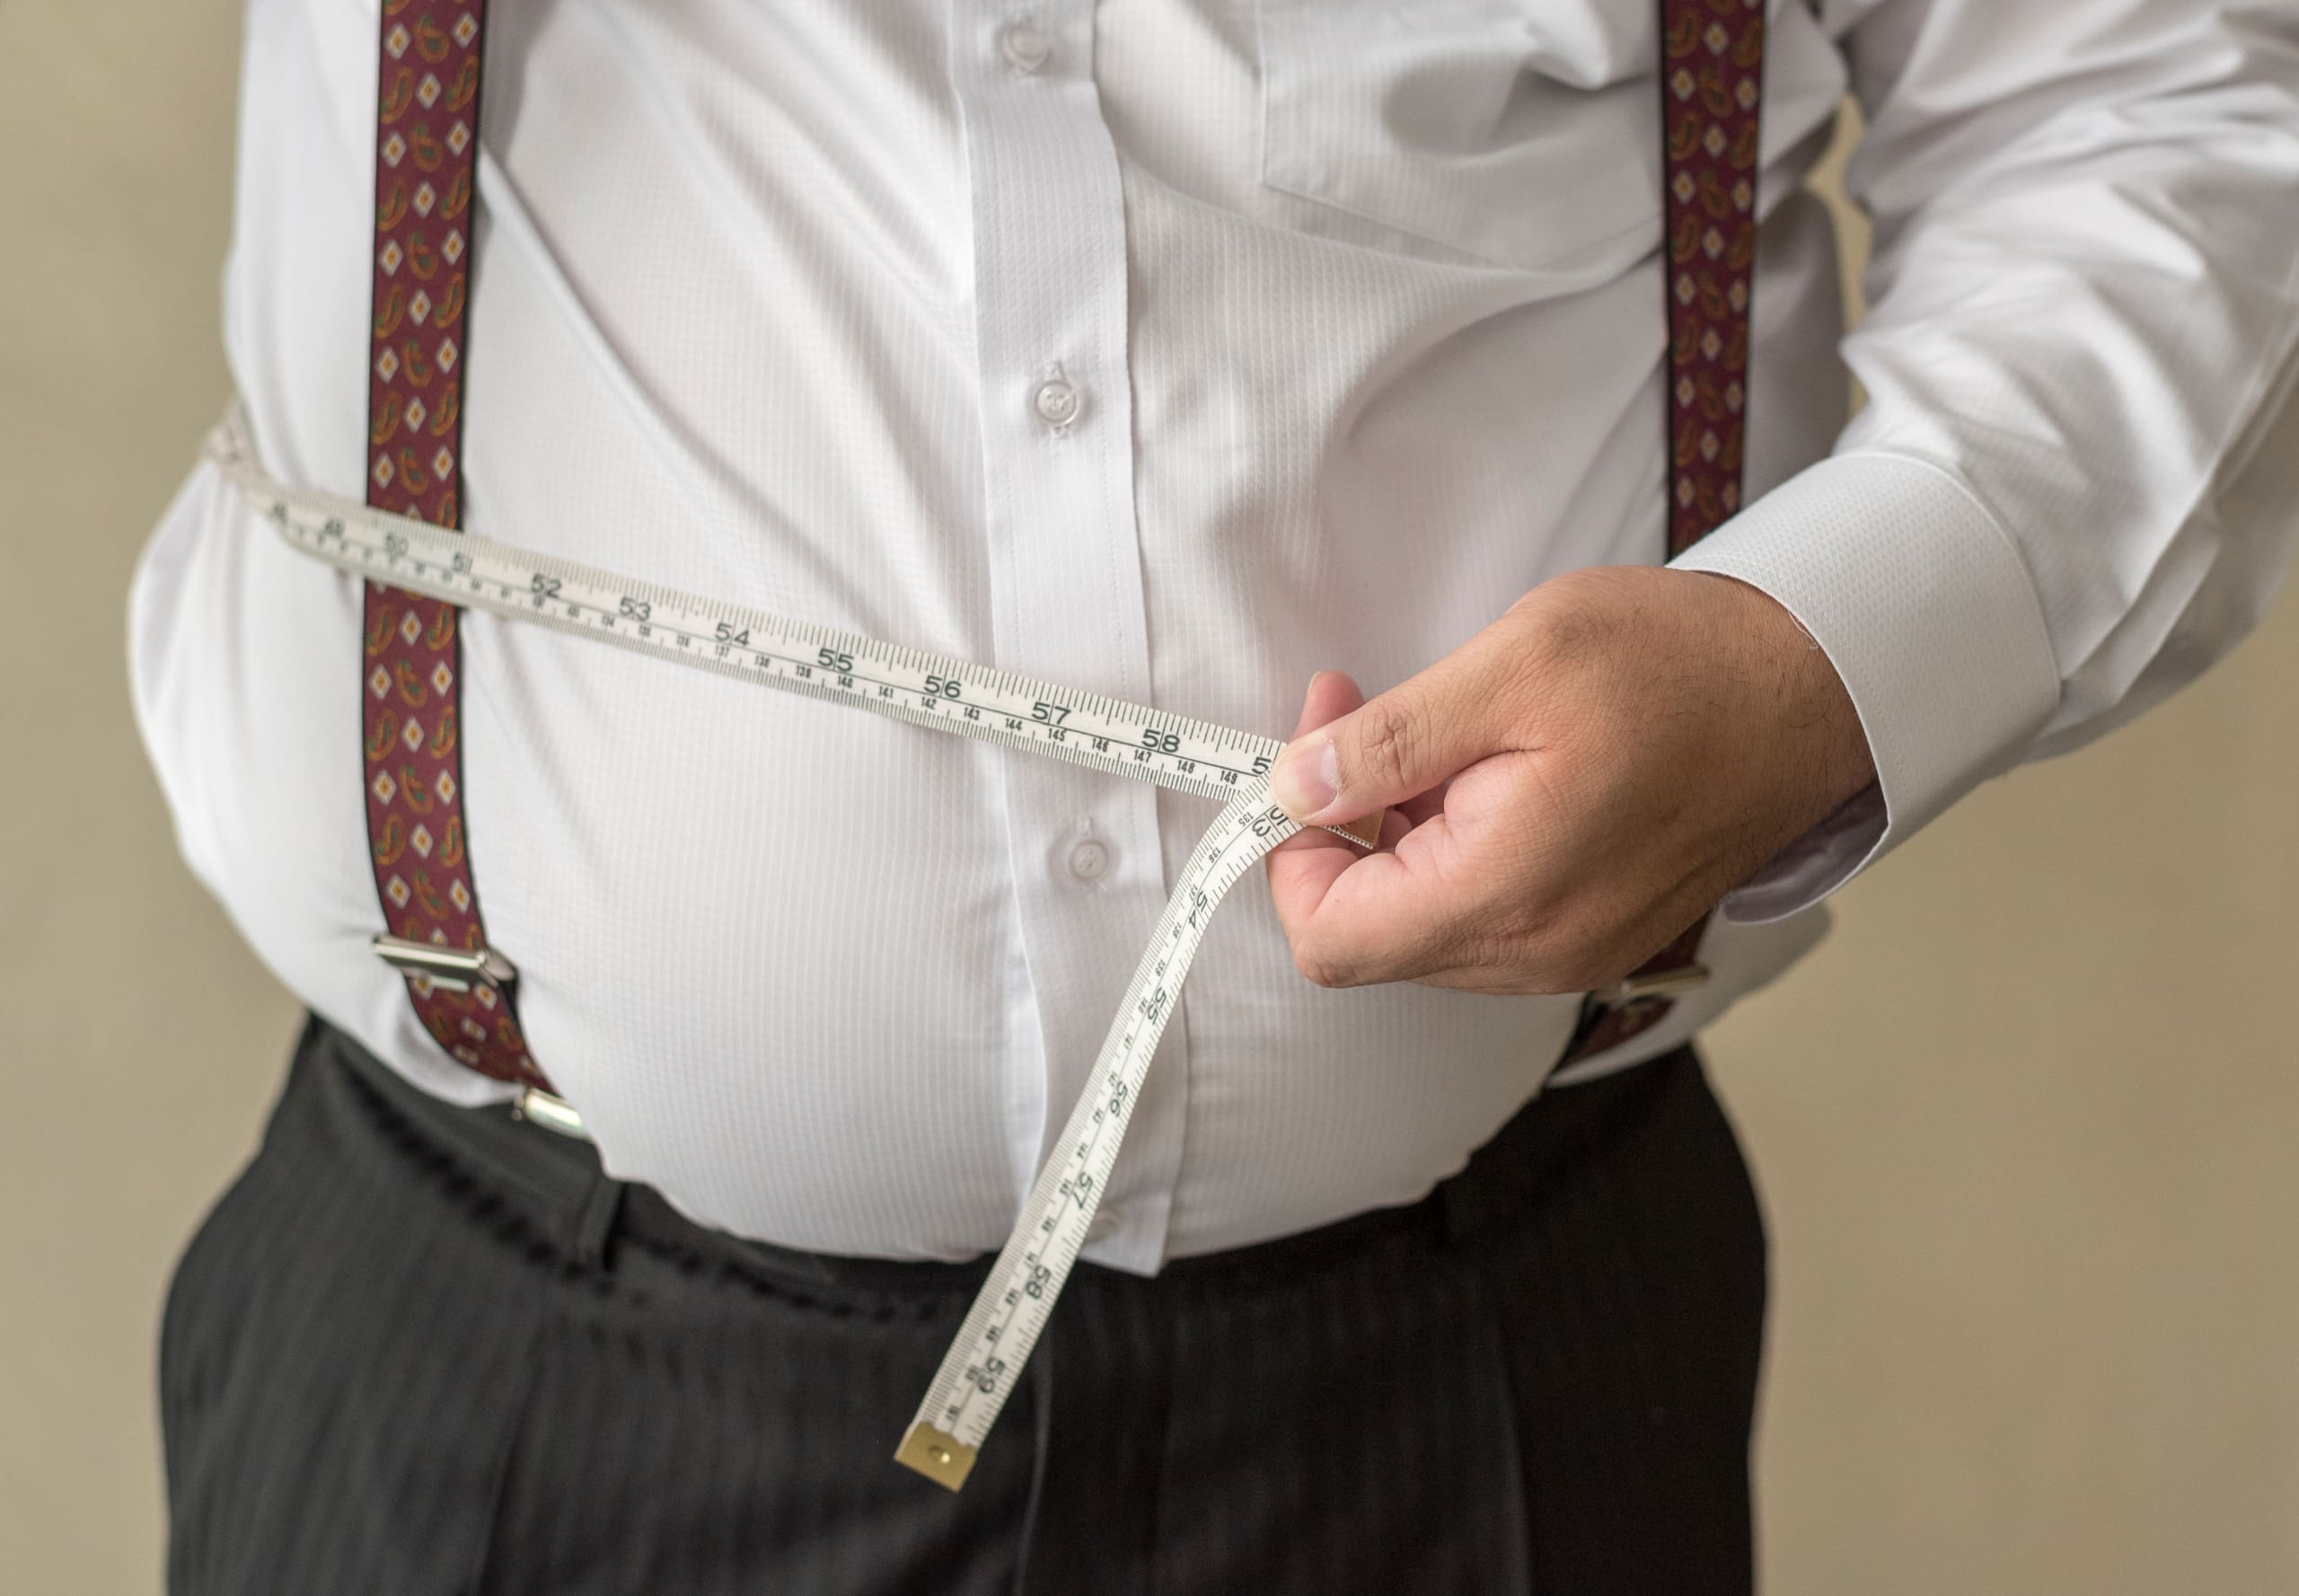 Overweight man holding a measuring tape